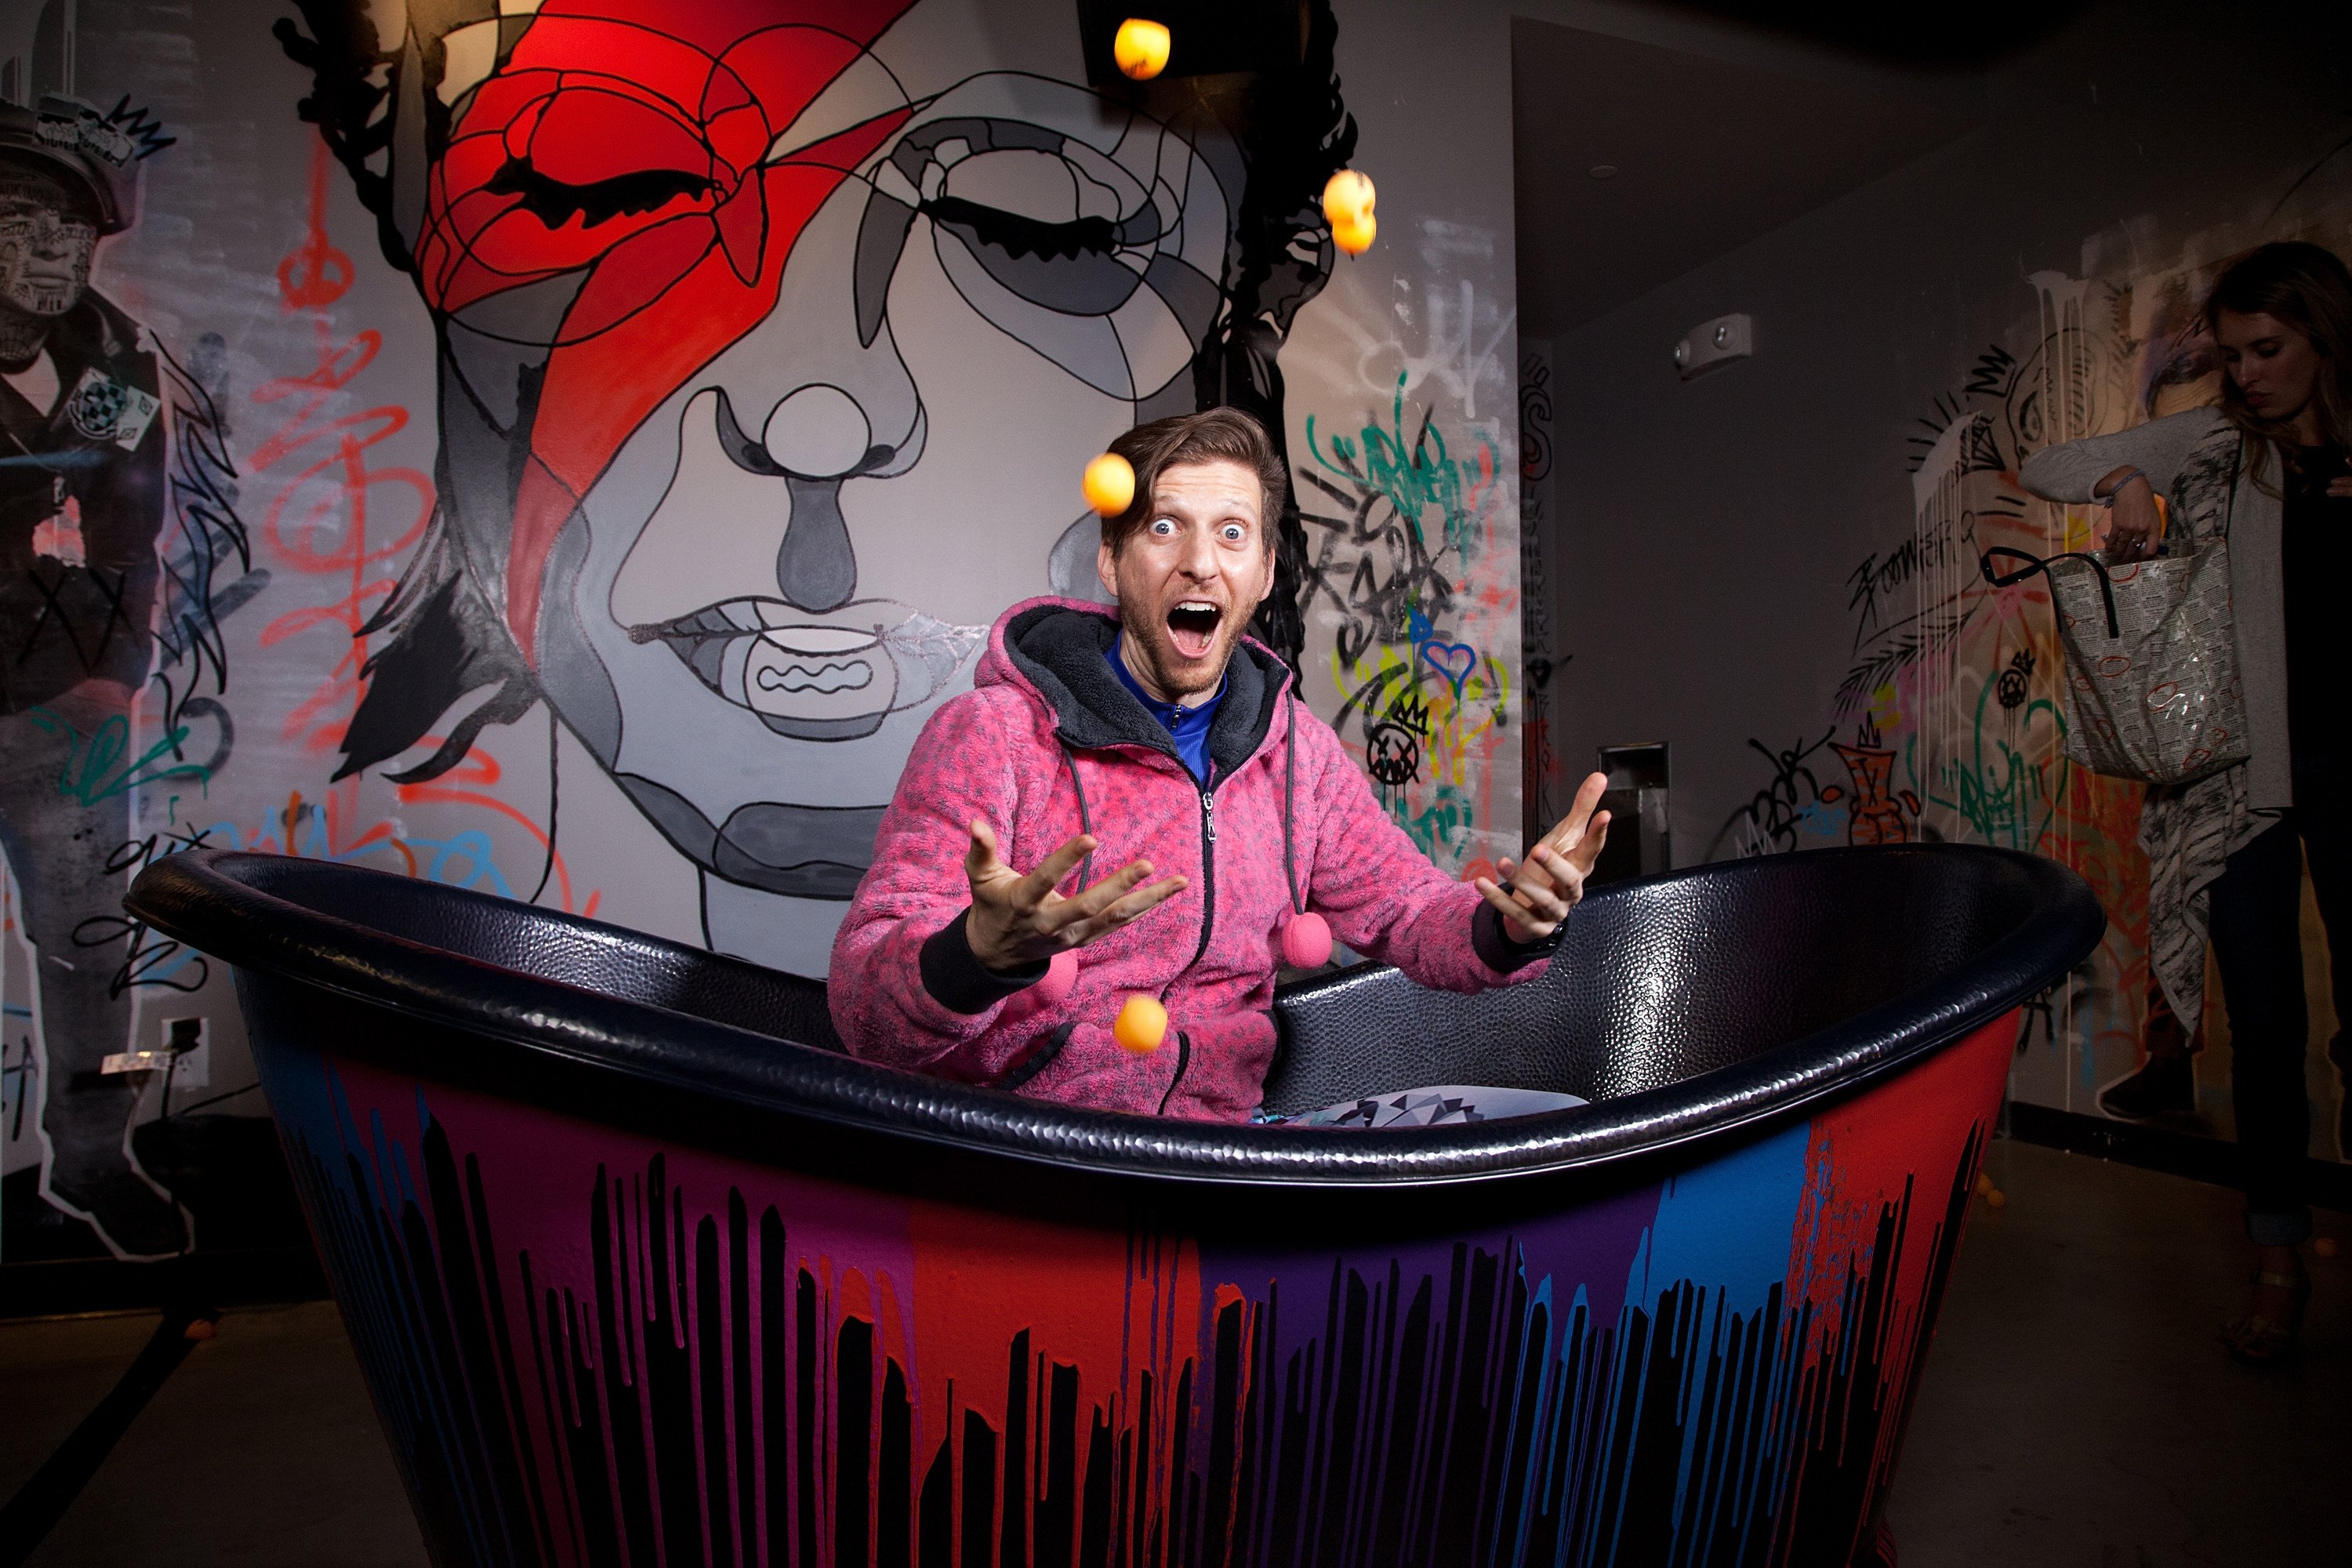 SAN FRANCISCO, CA - MAY 19:  Ping-pong professional Adam Bobrow poses for photos in the photobooth tub at the SPiN San Francisco Grand Opening on May 19, 2016 in San Francisco, California.  (Photo by Kelly Sullivan/WireImage)